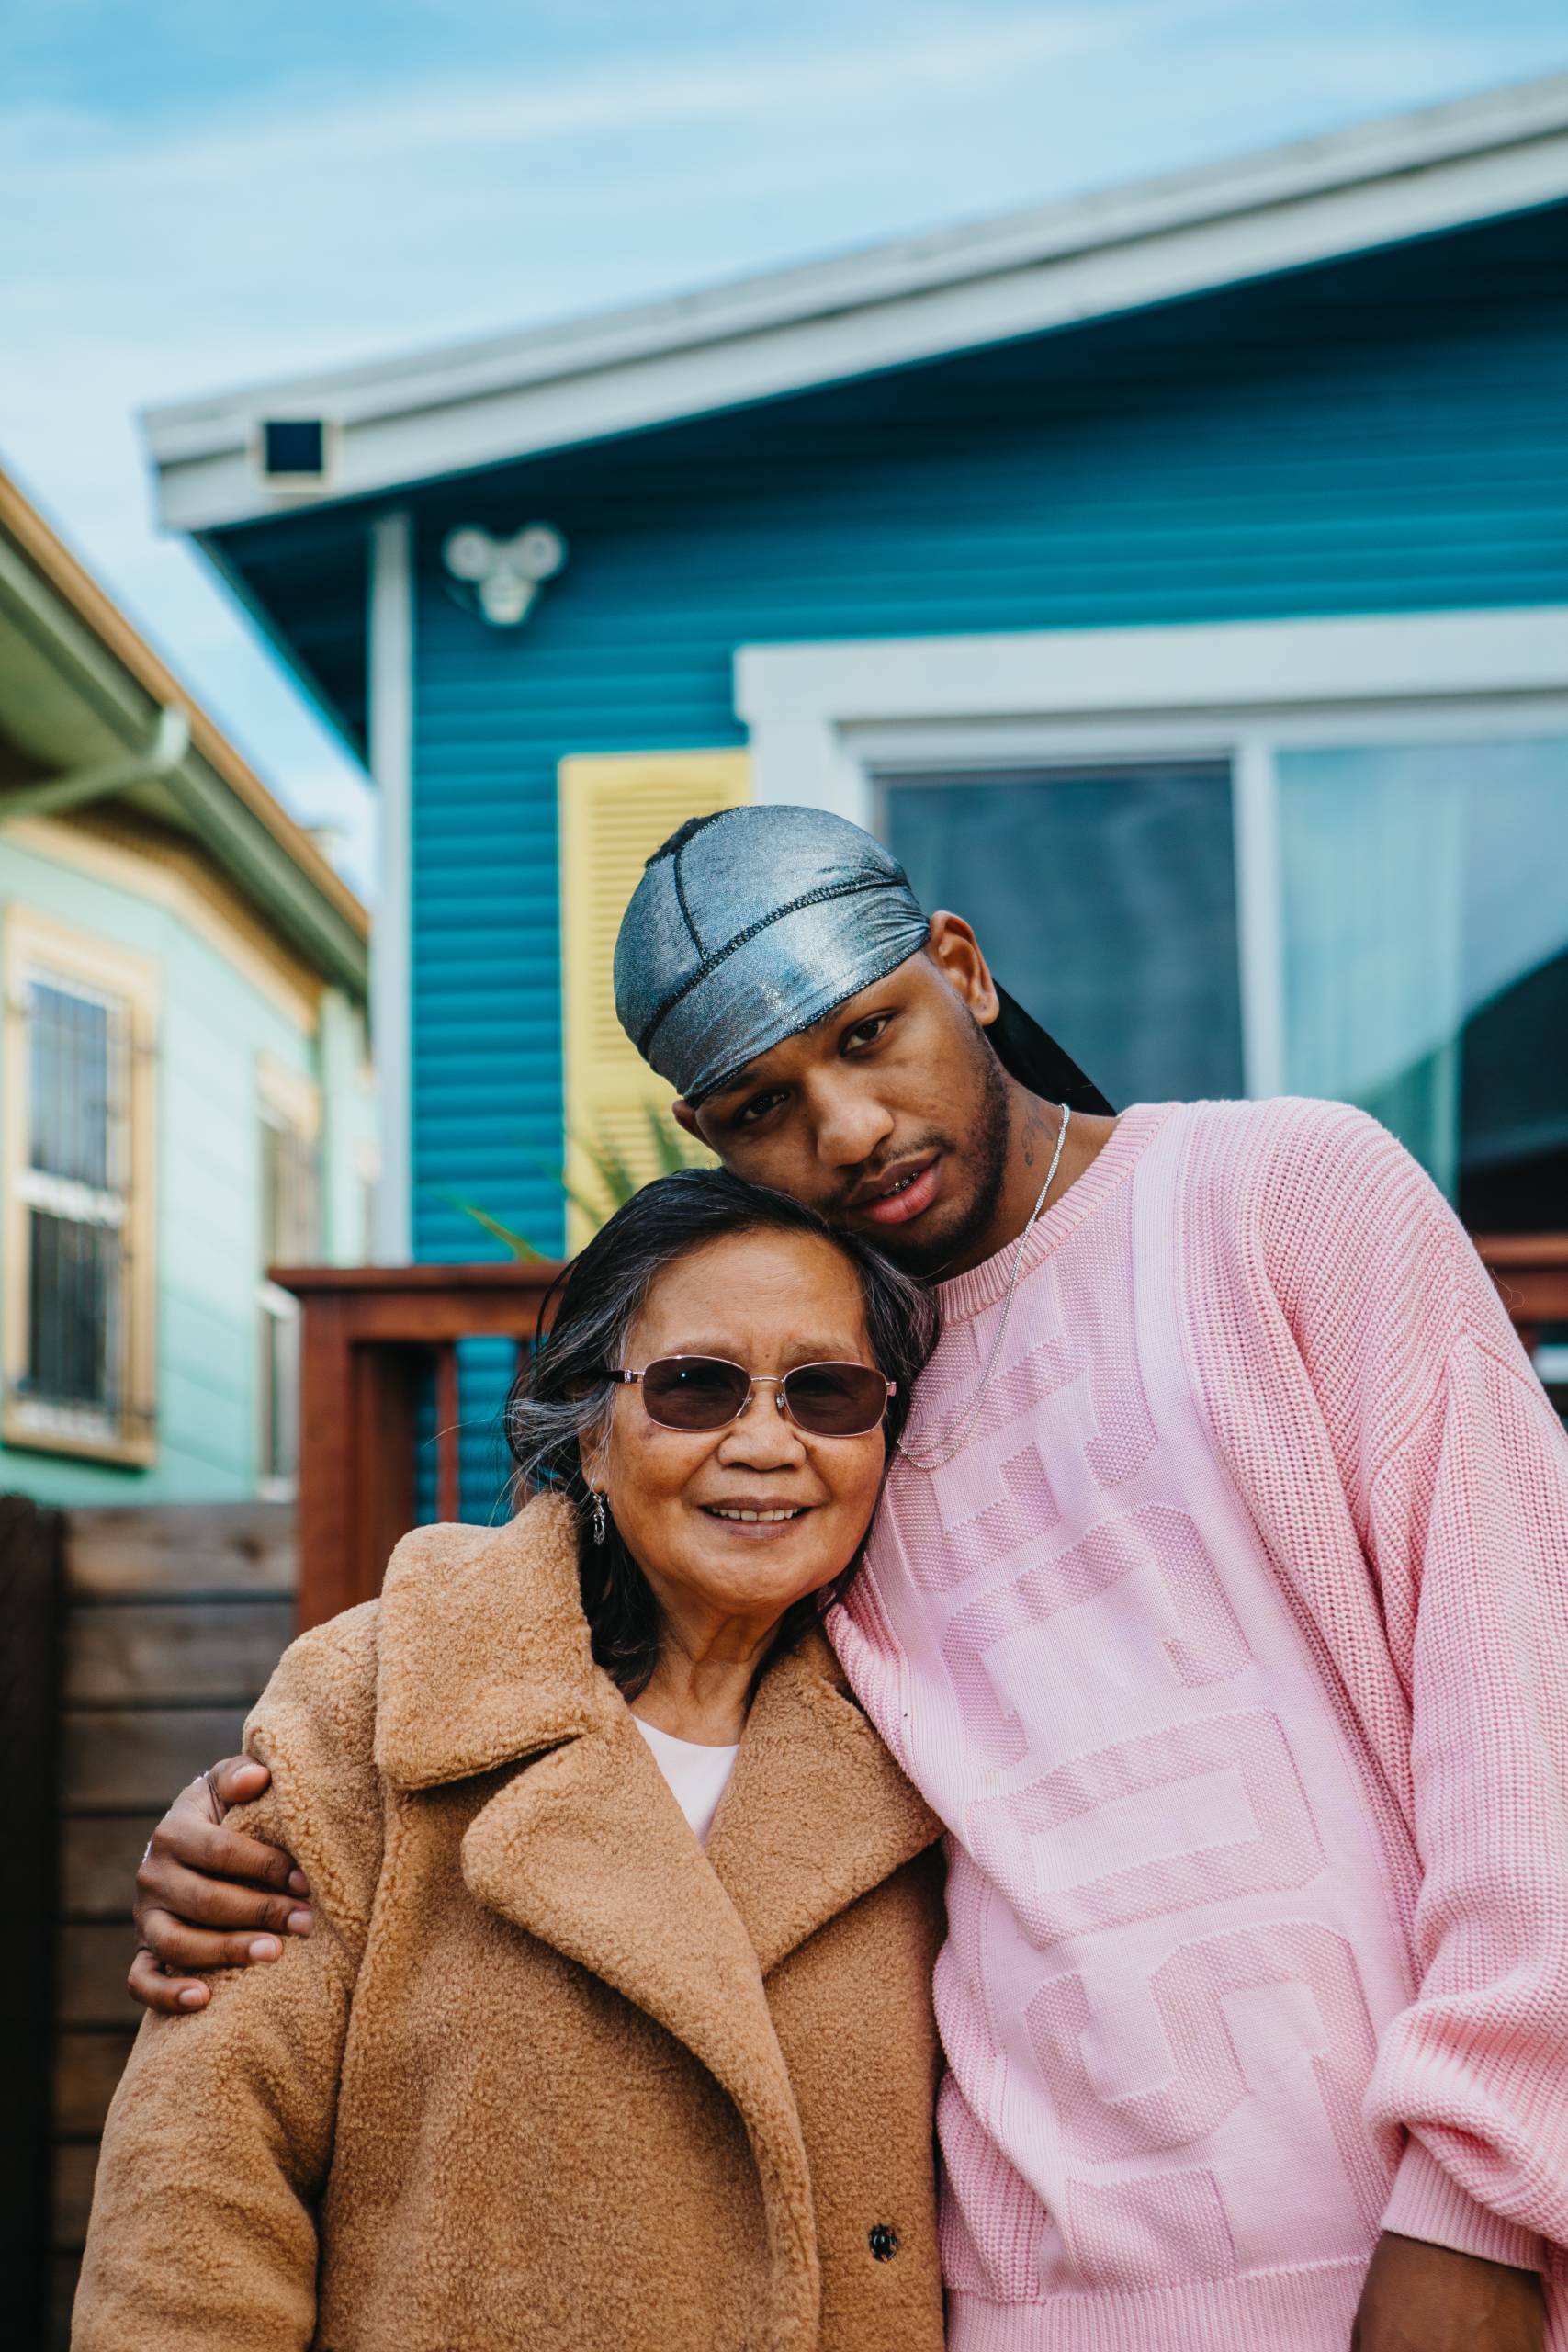 A Filipina grandmother in a fuzzy, brown coat and wearing sunglasses smiles as she poses for a photo with her grandson, who towers above her and lays his cheek on top of his head, wears a pink, knitted sweater and silver durag.